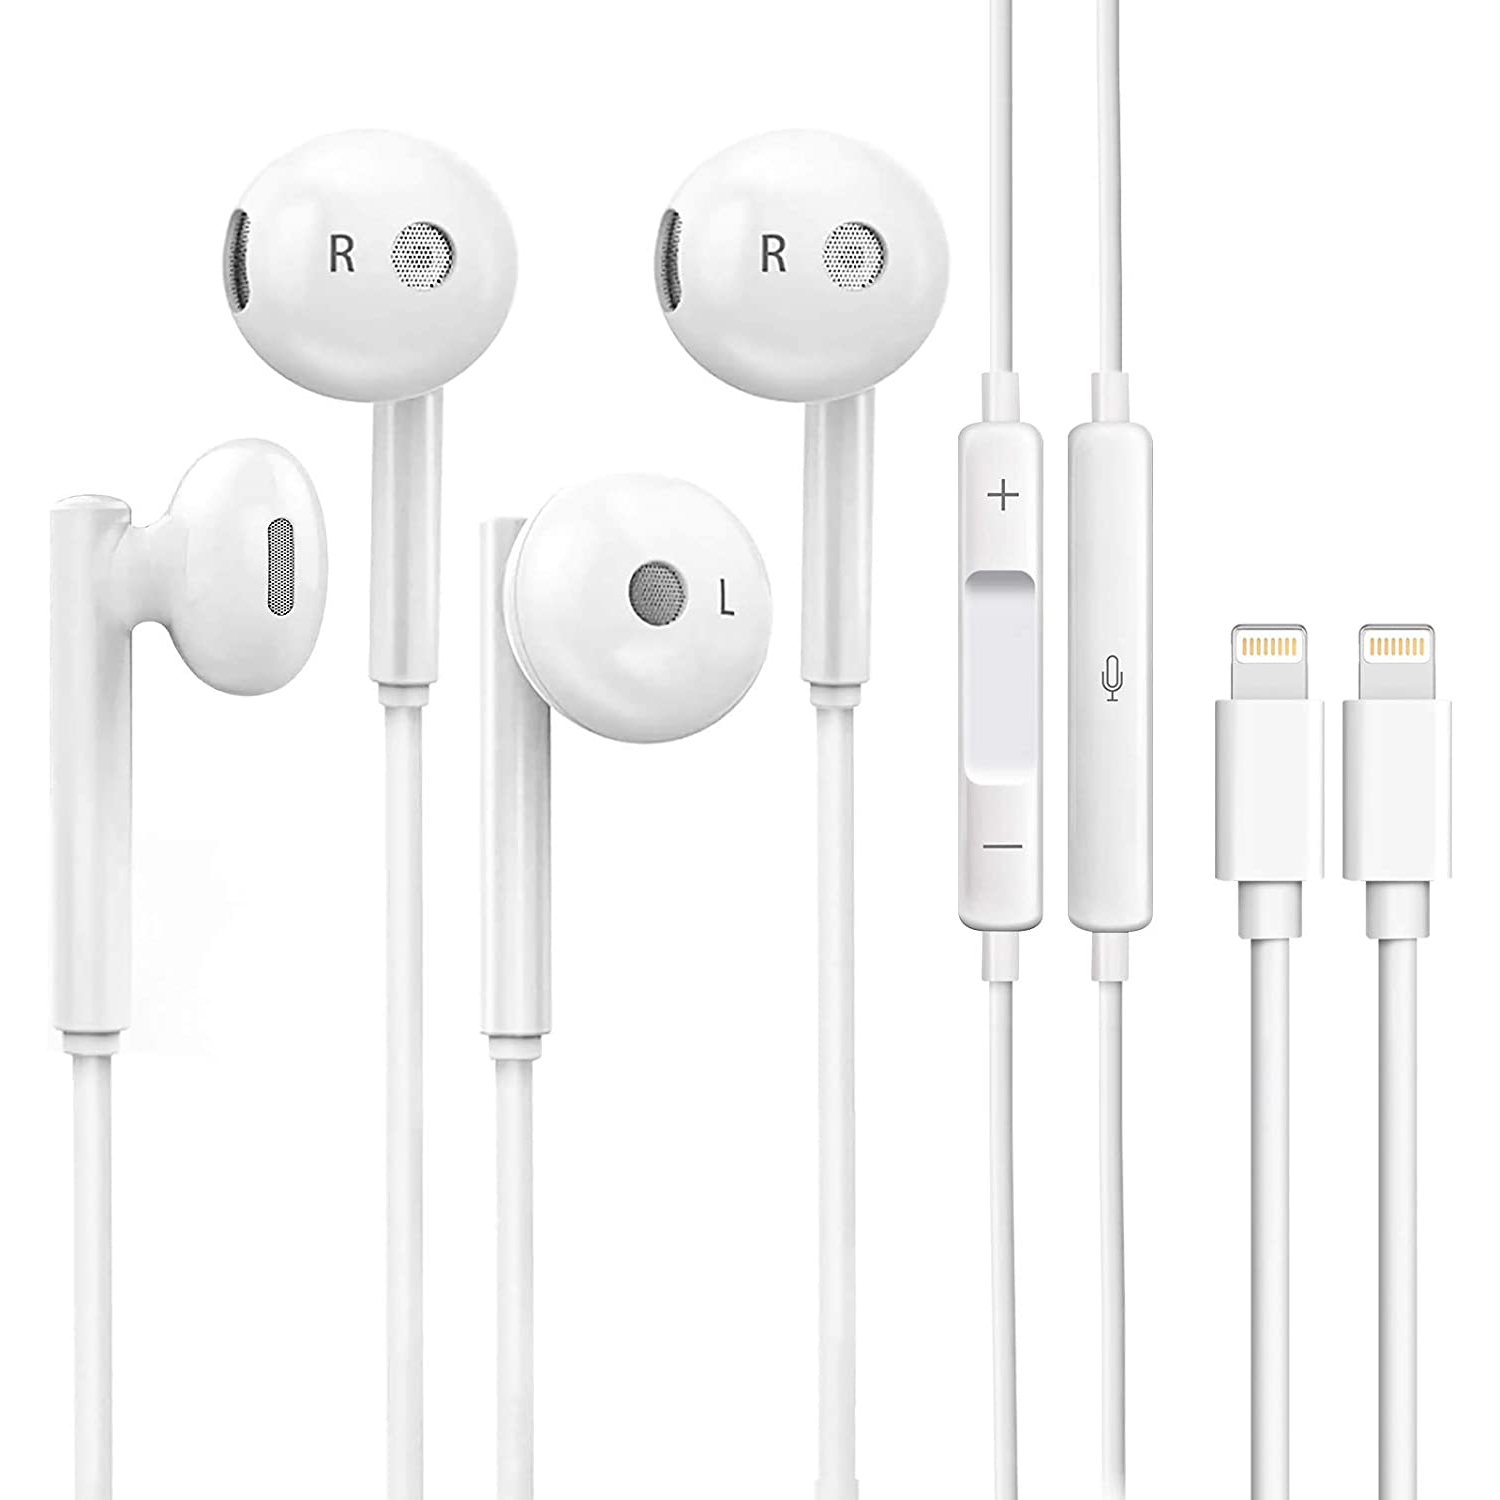 Headphones/Earbuds/Earphones Wired for iPhone Noise Isolating Earphones Built-in Microphone with Remote & Micphone Compatible with iPhone 7/7plus 8/8plus X/Xs/XR/Xs max/11/12/pro/se iPad/iPod-7 